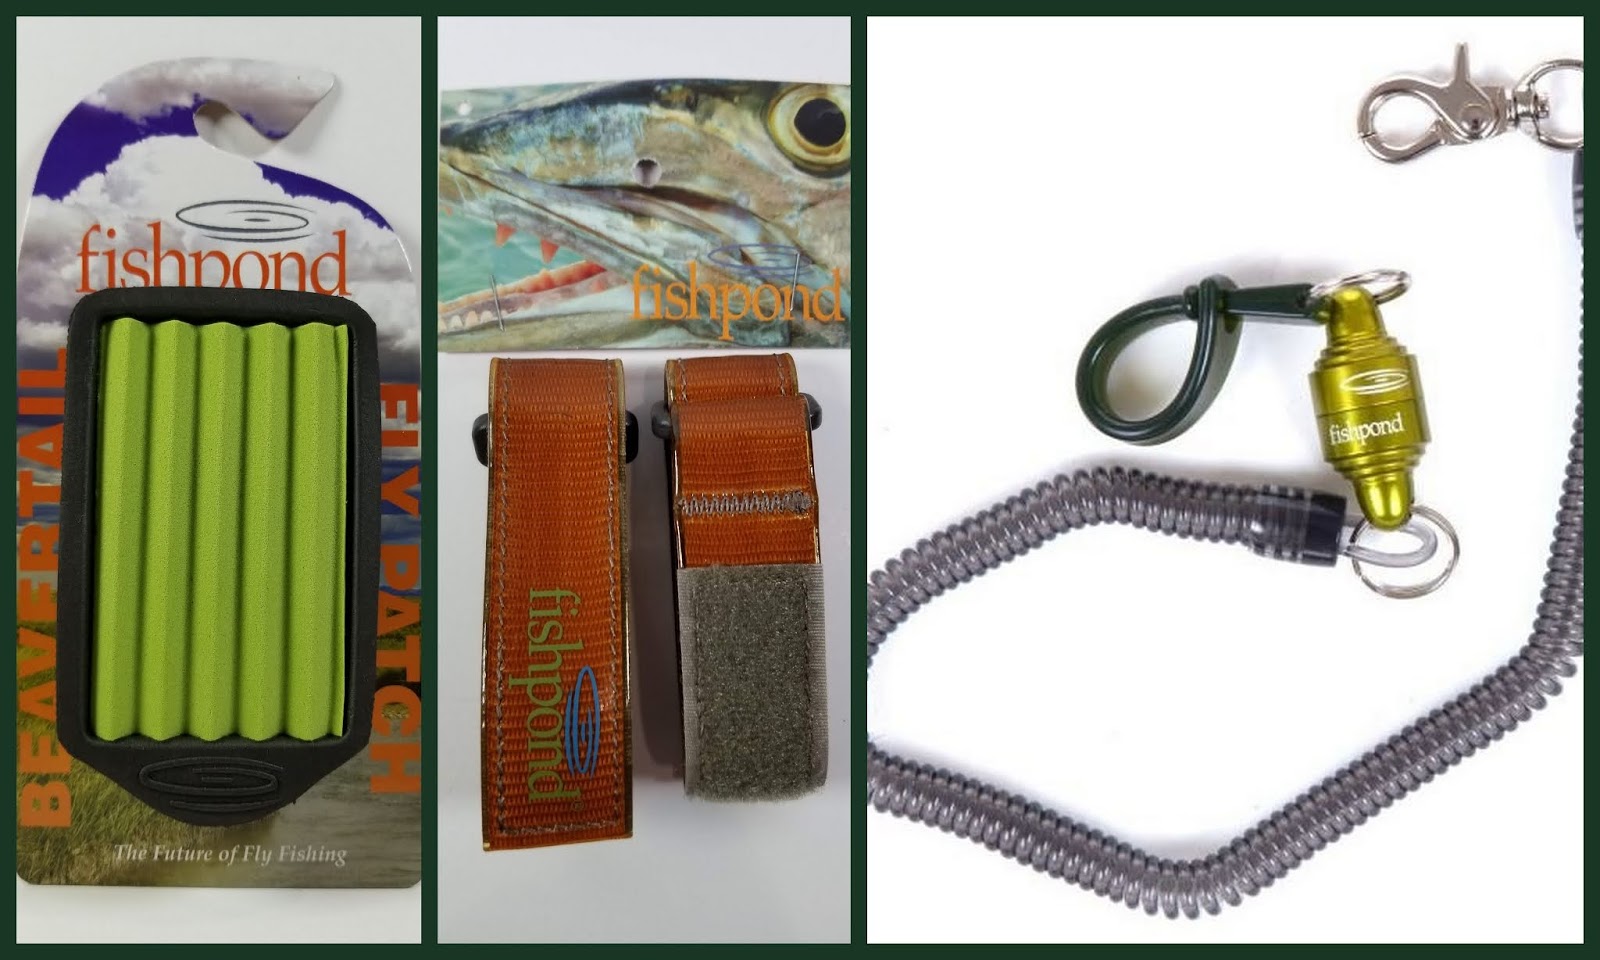 Gorge Fly Shop Blog: Fishpond Fly Fishing Accessories